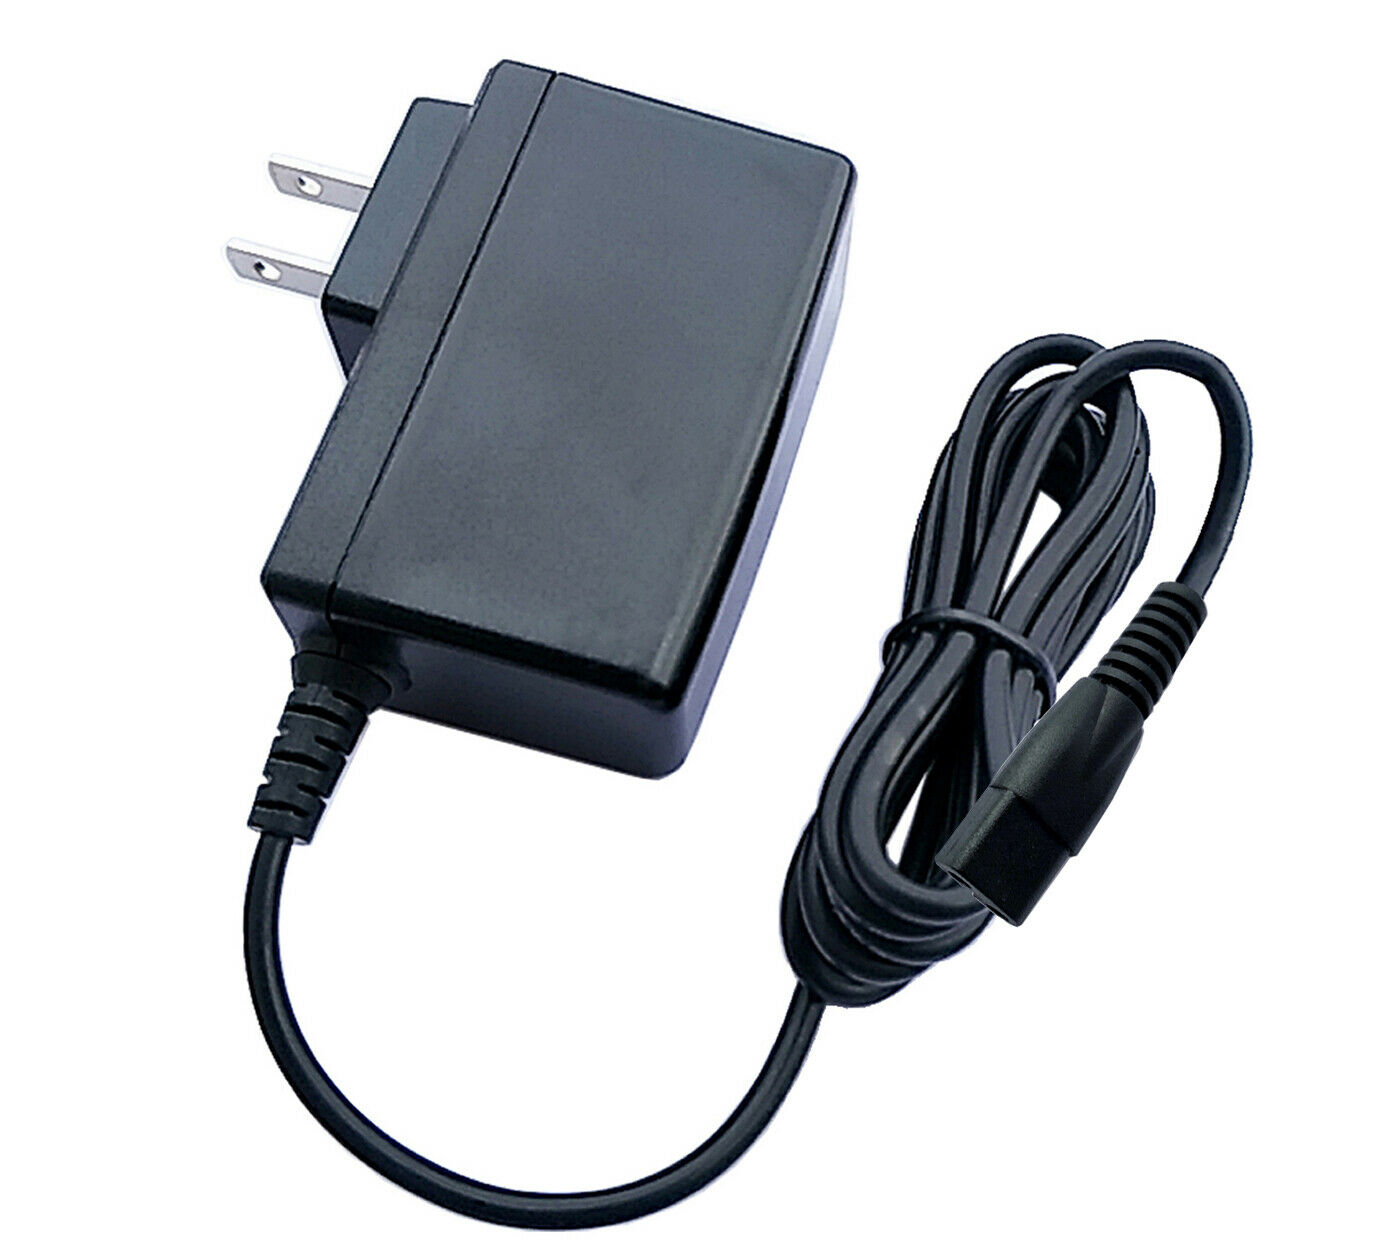 AC/DC Adapter For Coleman Obsolete 19.2V 24V Power Supply Cord Battery Charger Technical Specifications: 1 AC input vo